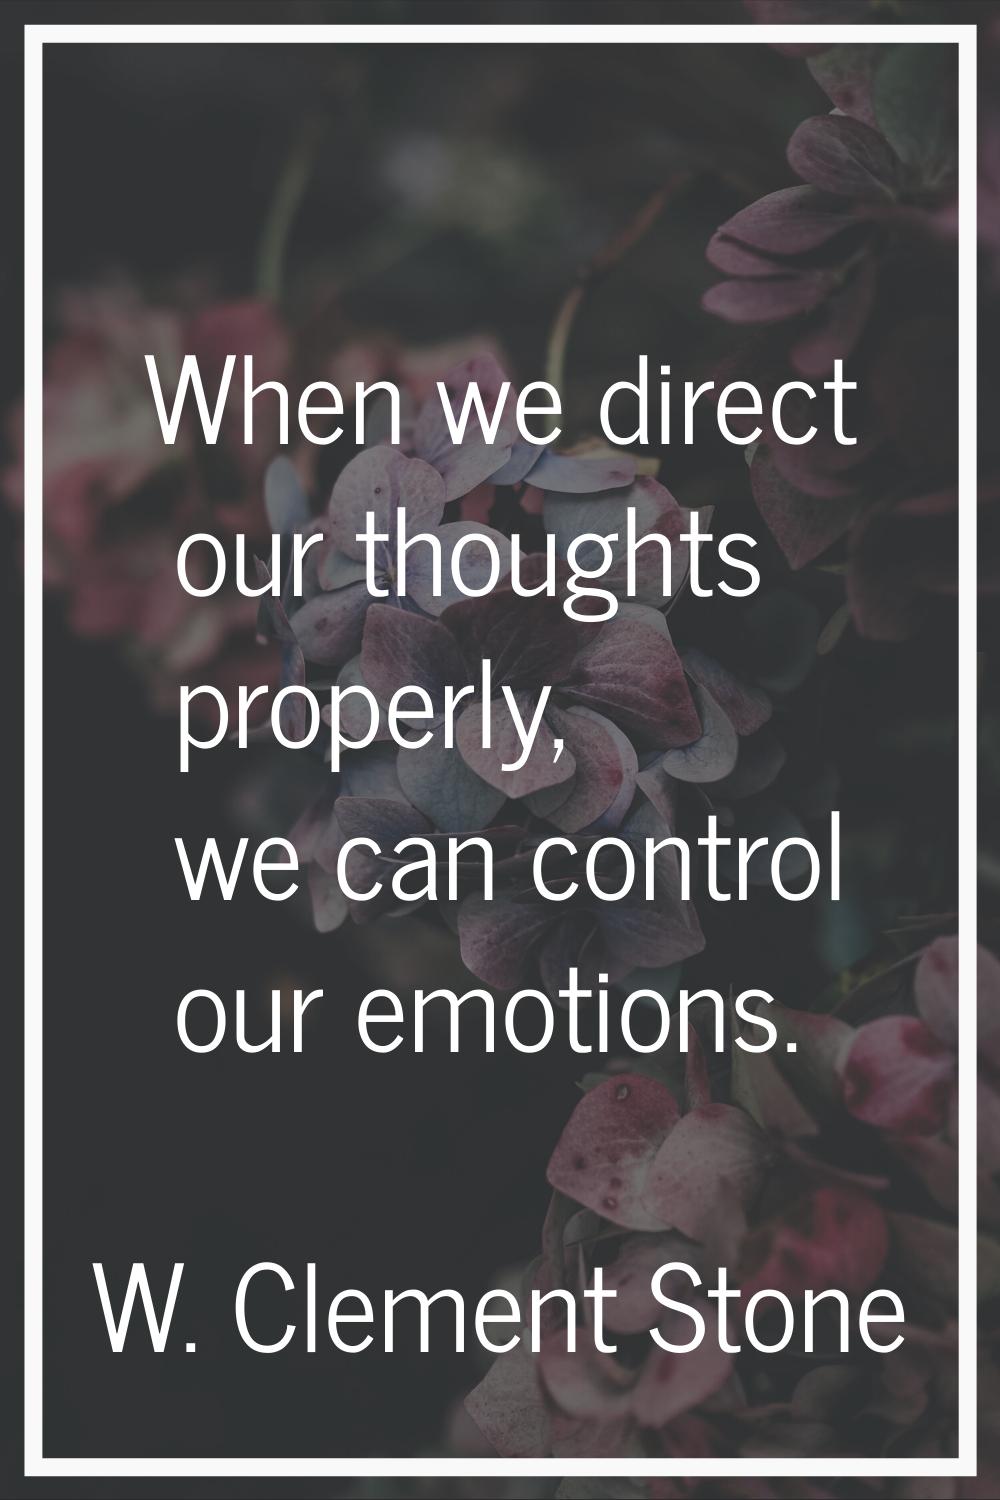 When we direct our thoughts properly, we can control our emotions.